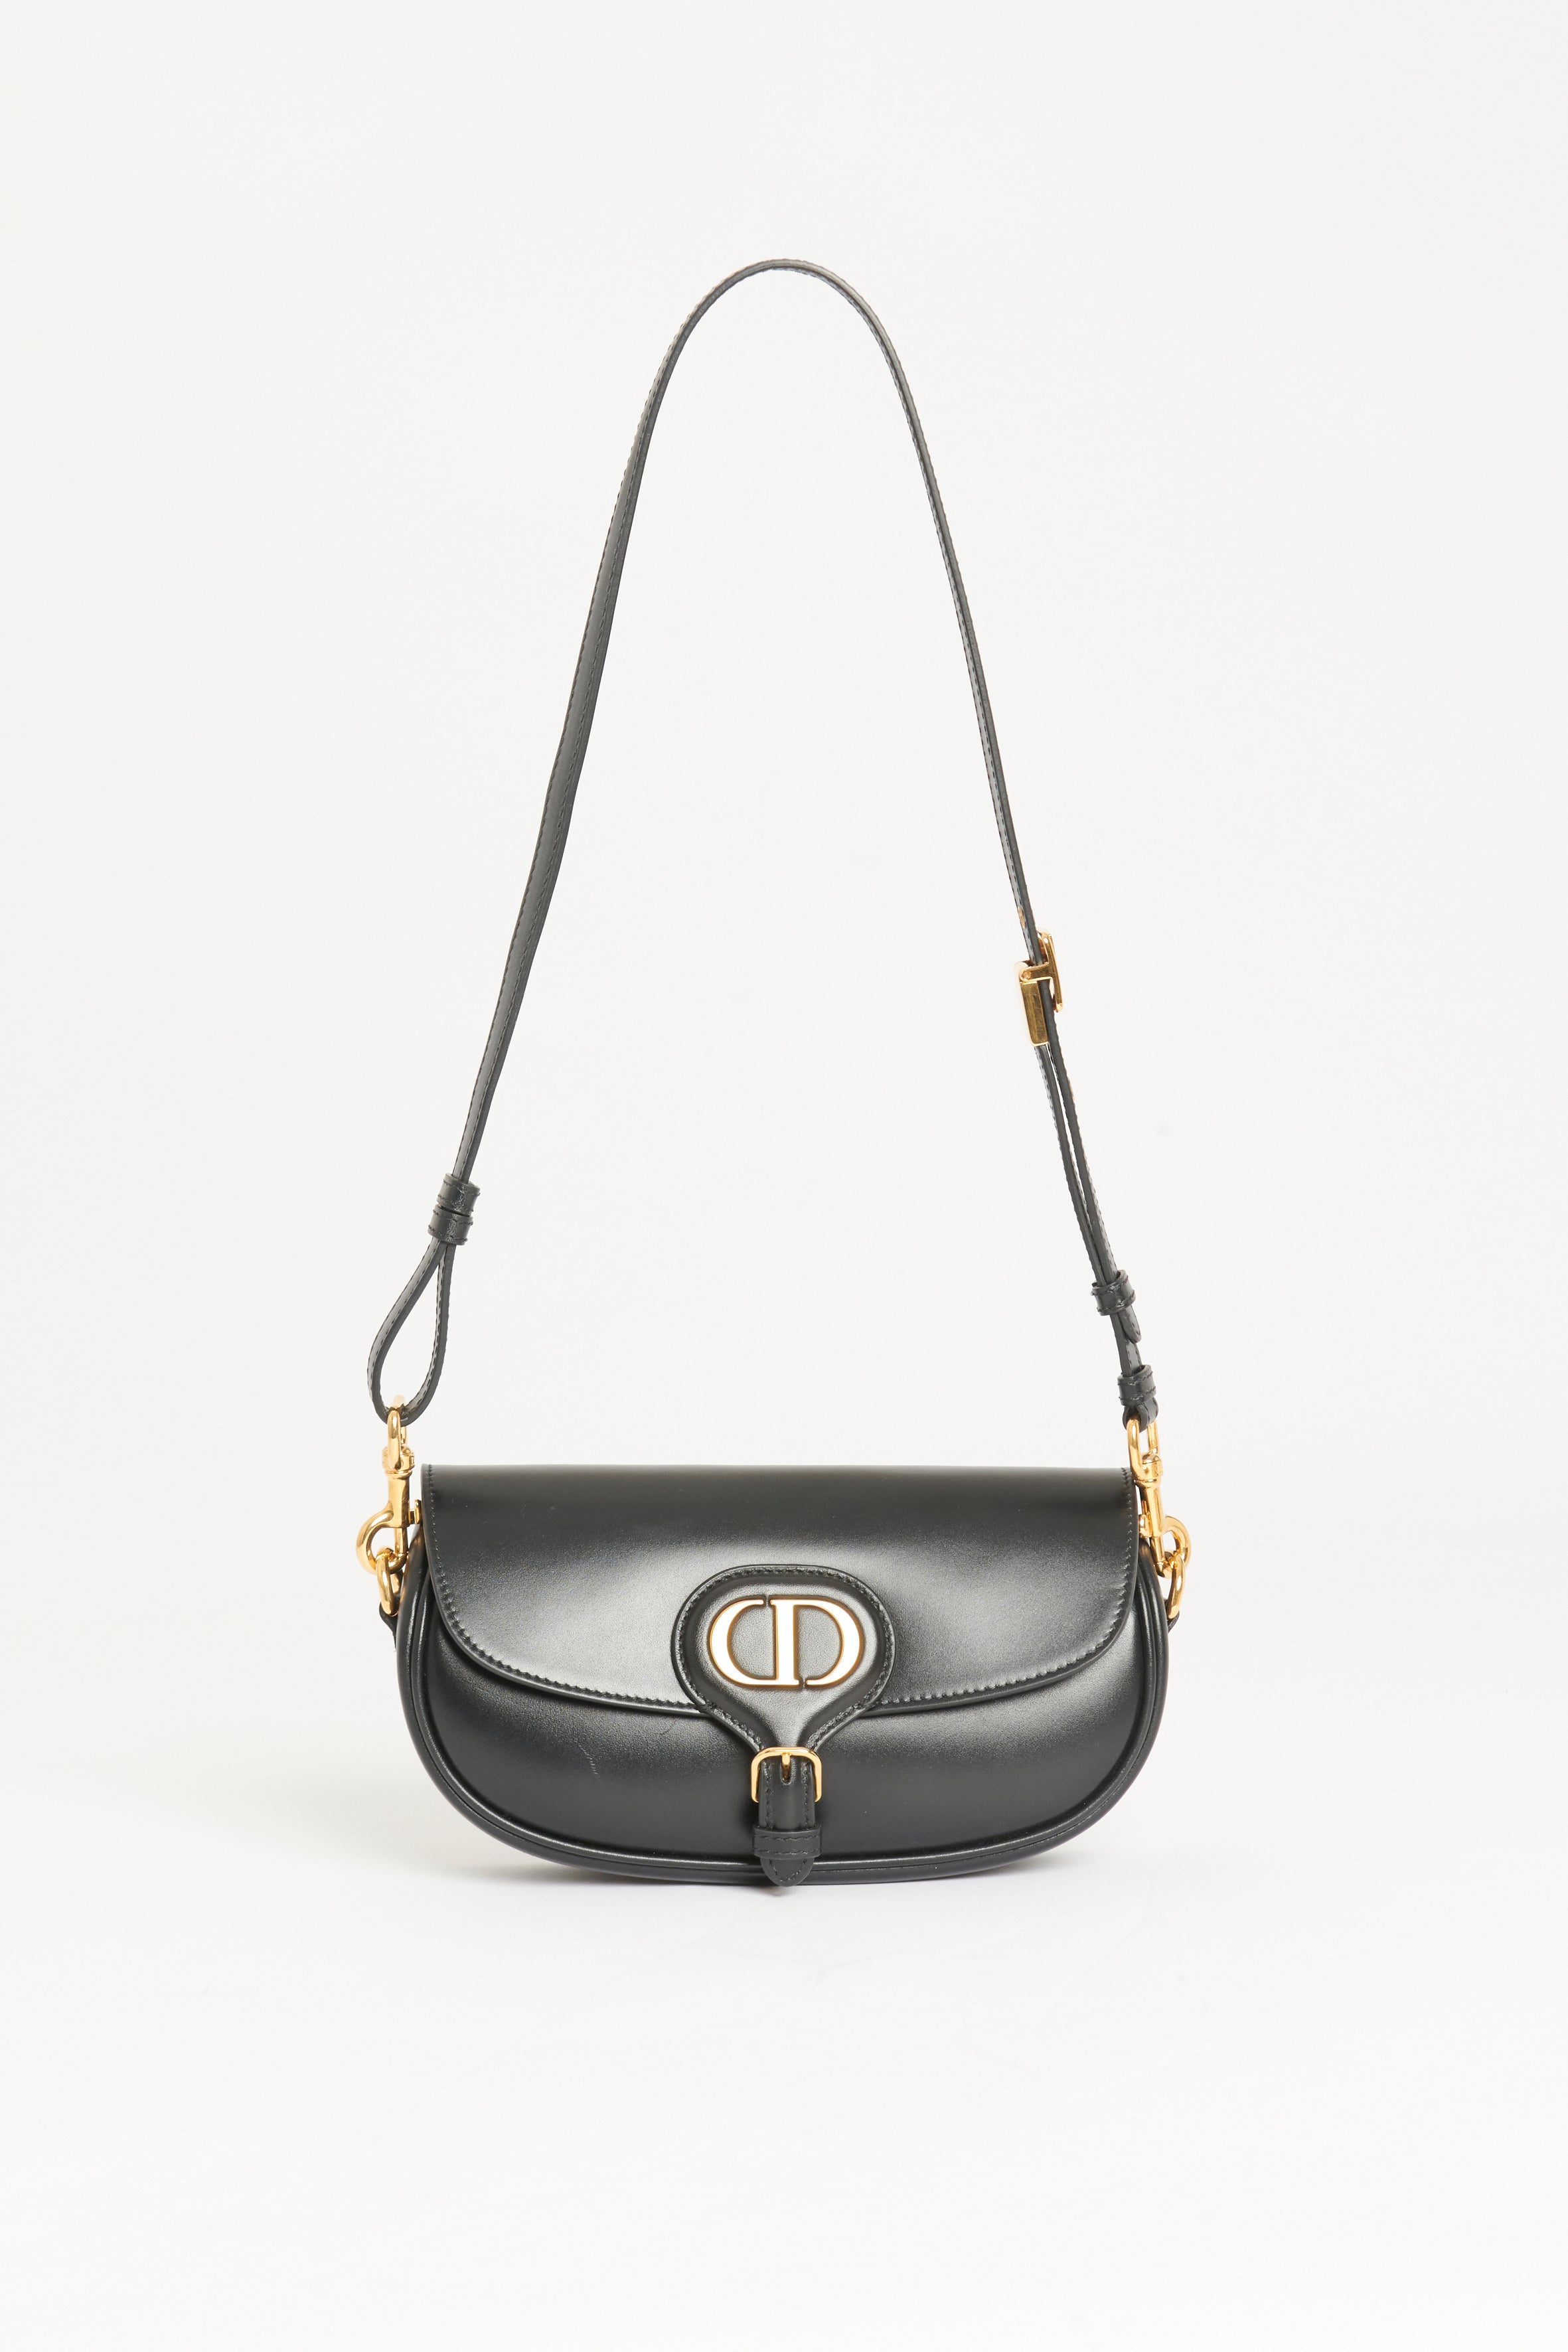 Forever New Sale | Shop Women's Bags On Sale